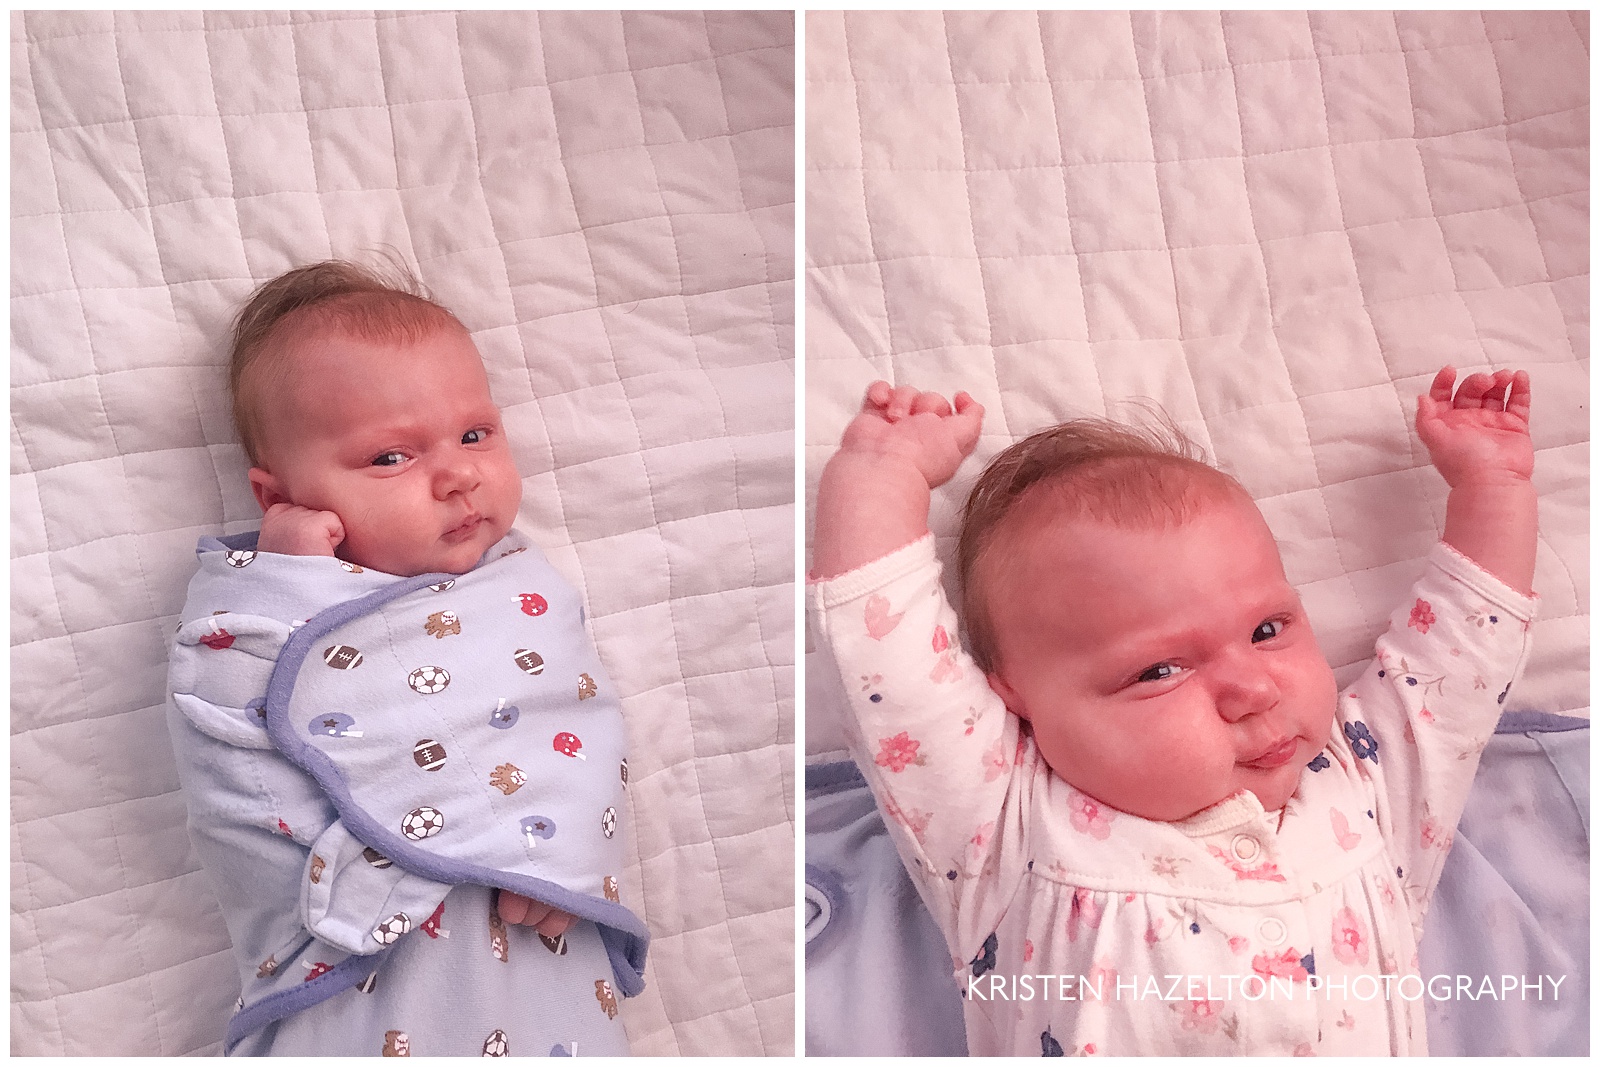 Collage of a baby stretching